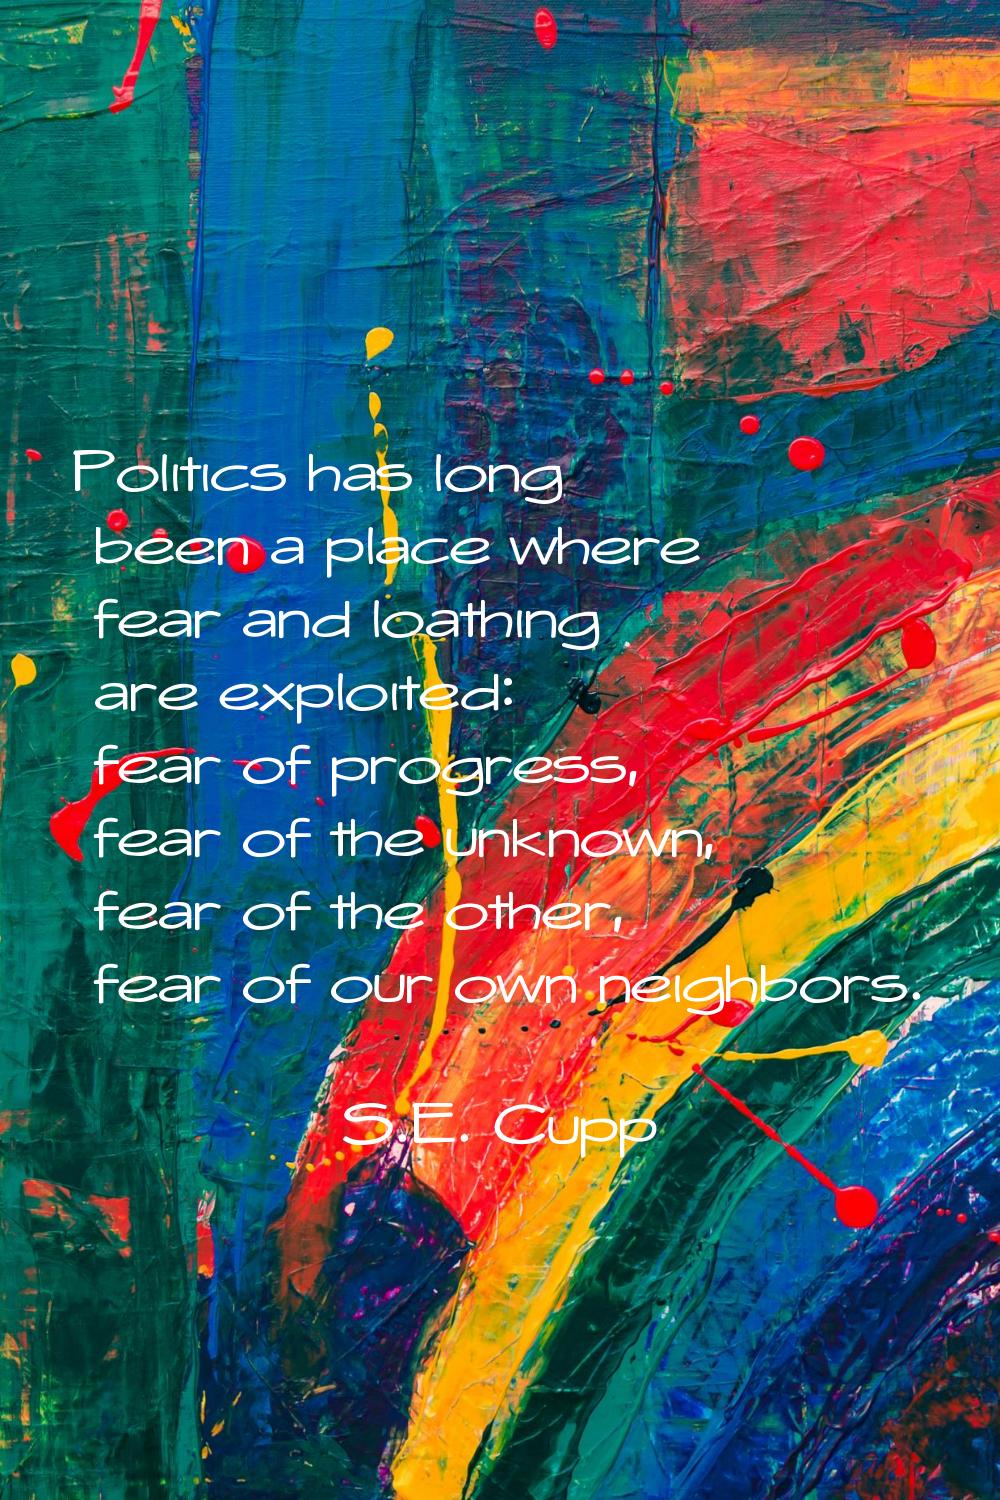 Politics has long been a place where fear and loathing are exploited: fear of progress, fear of the